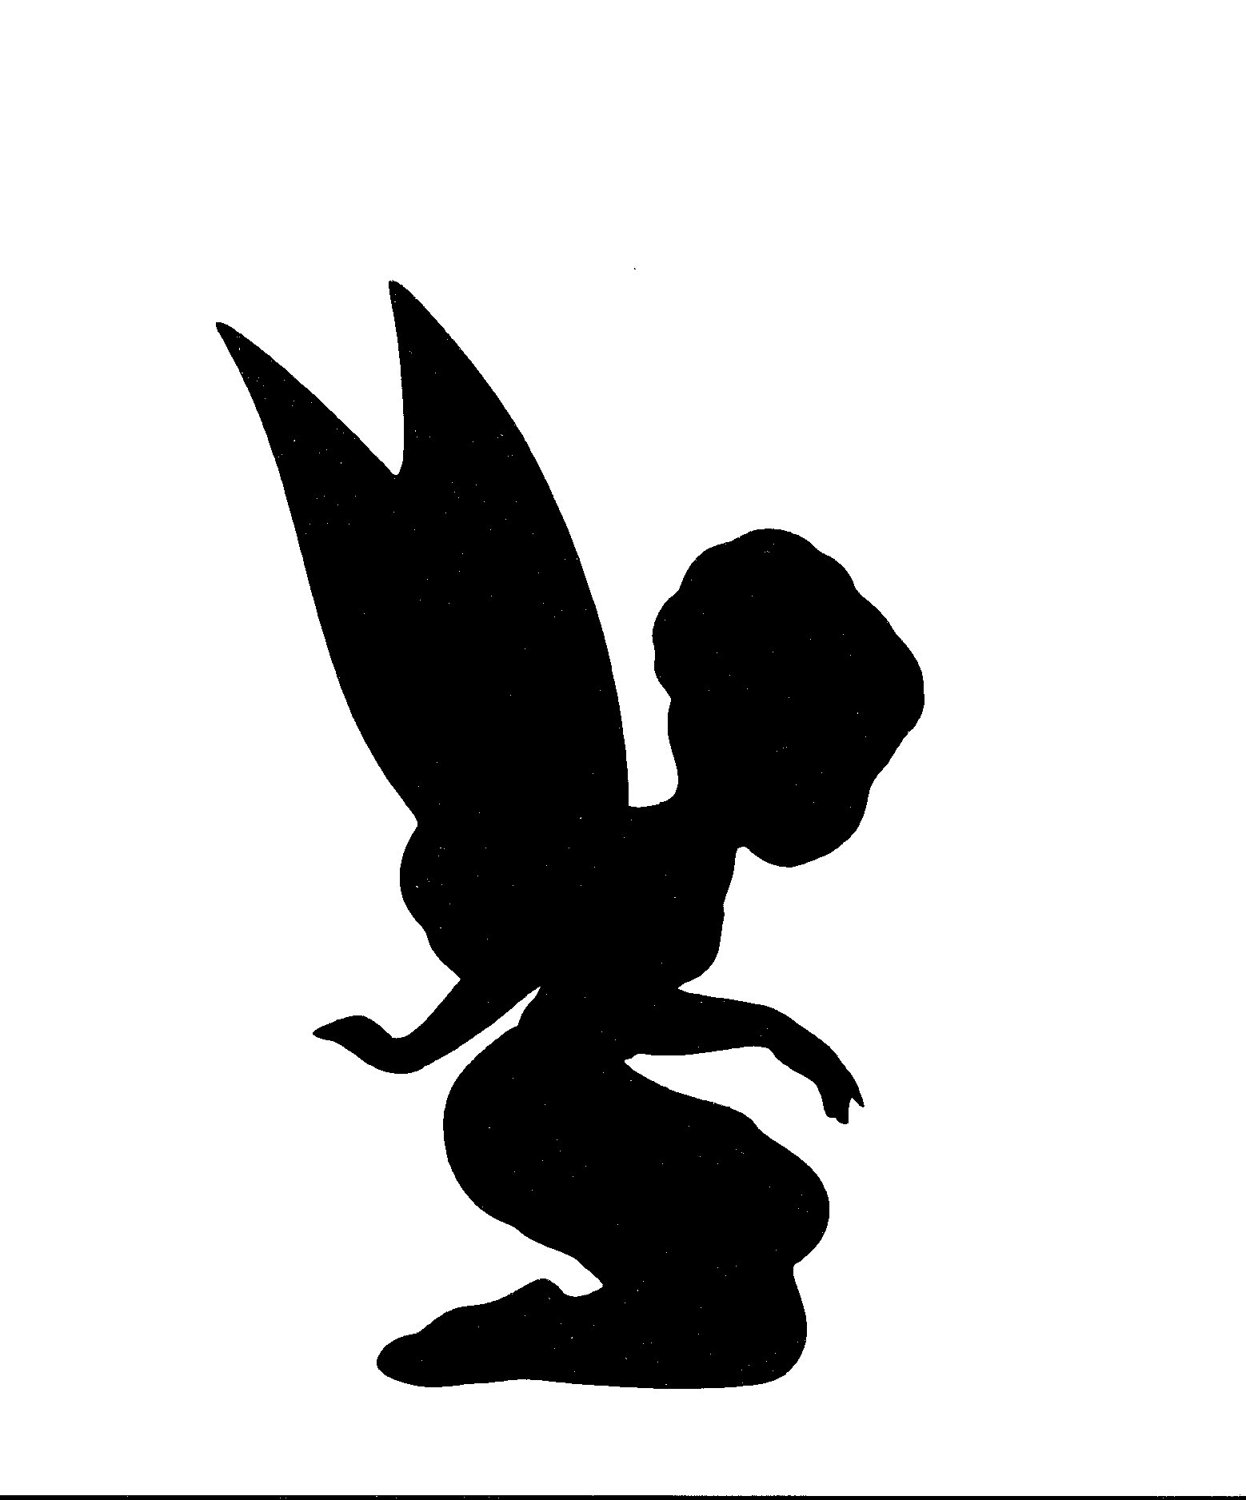 Free Printable Cut Out Fairy Silhouette